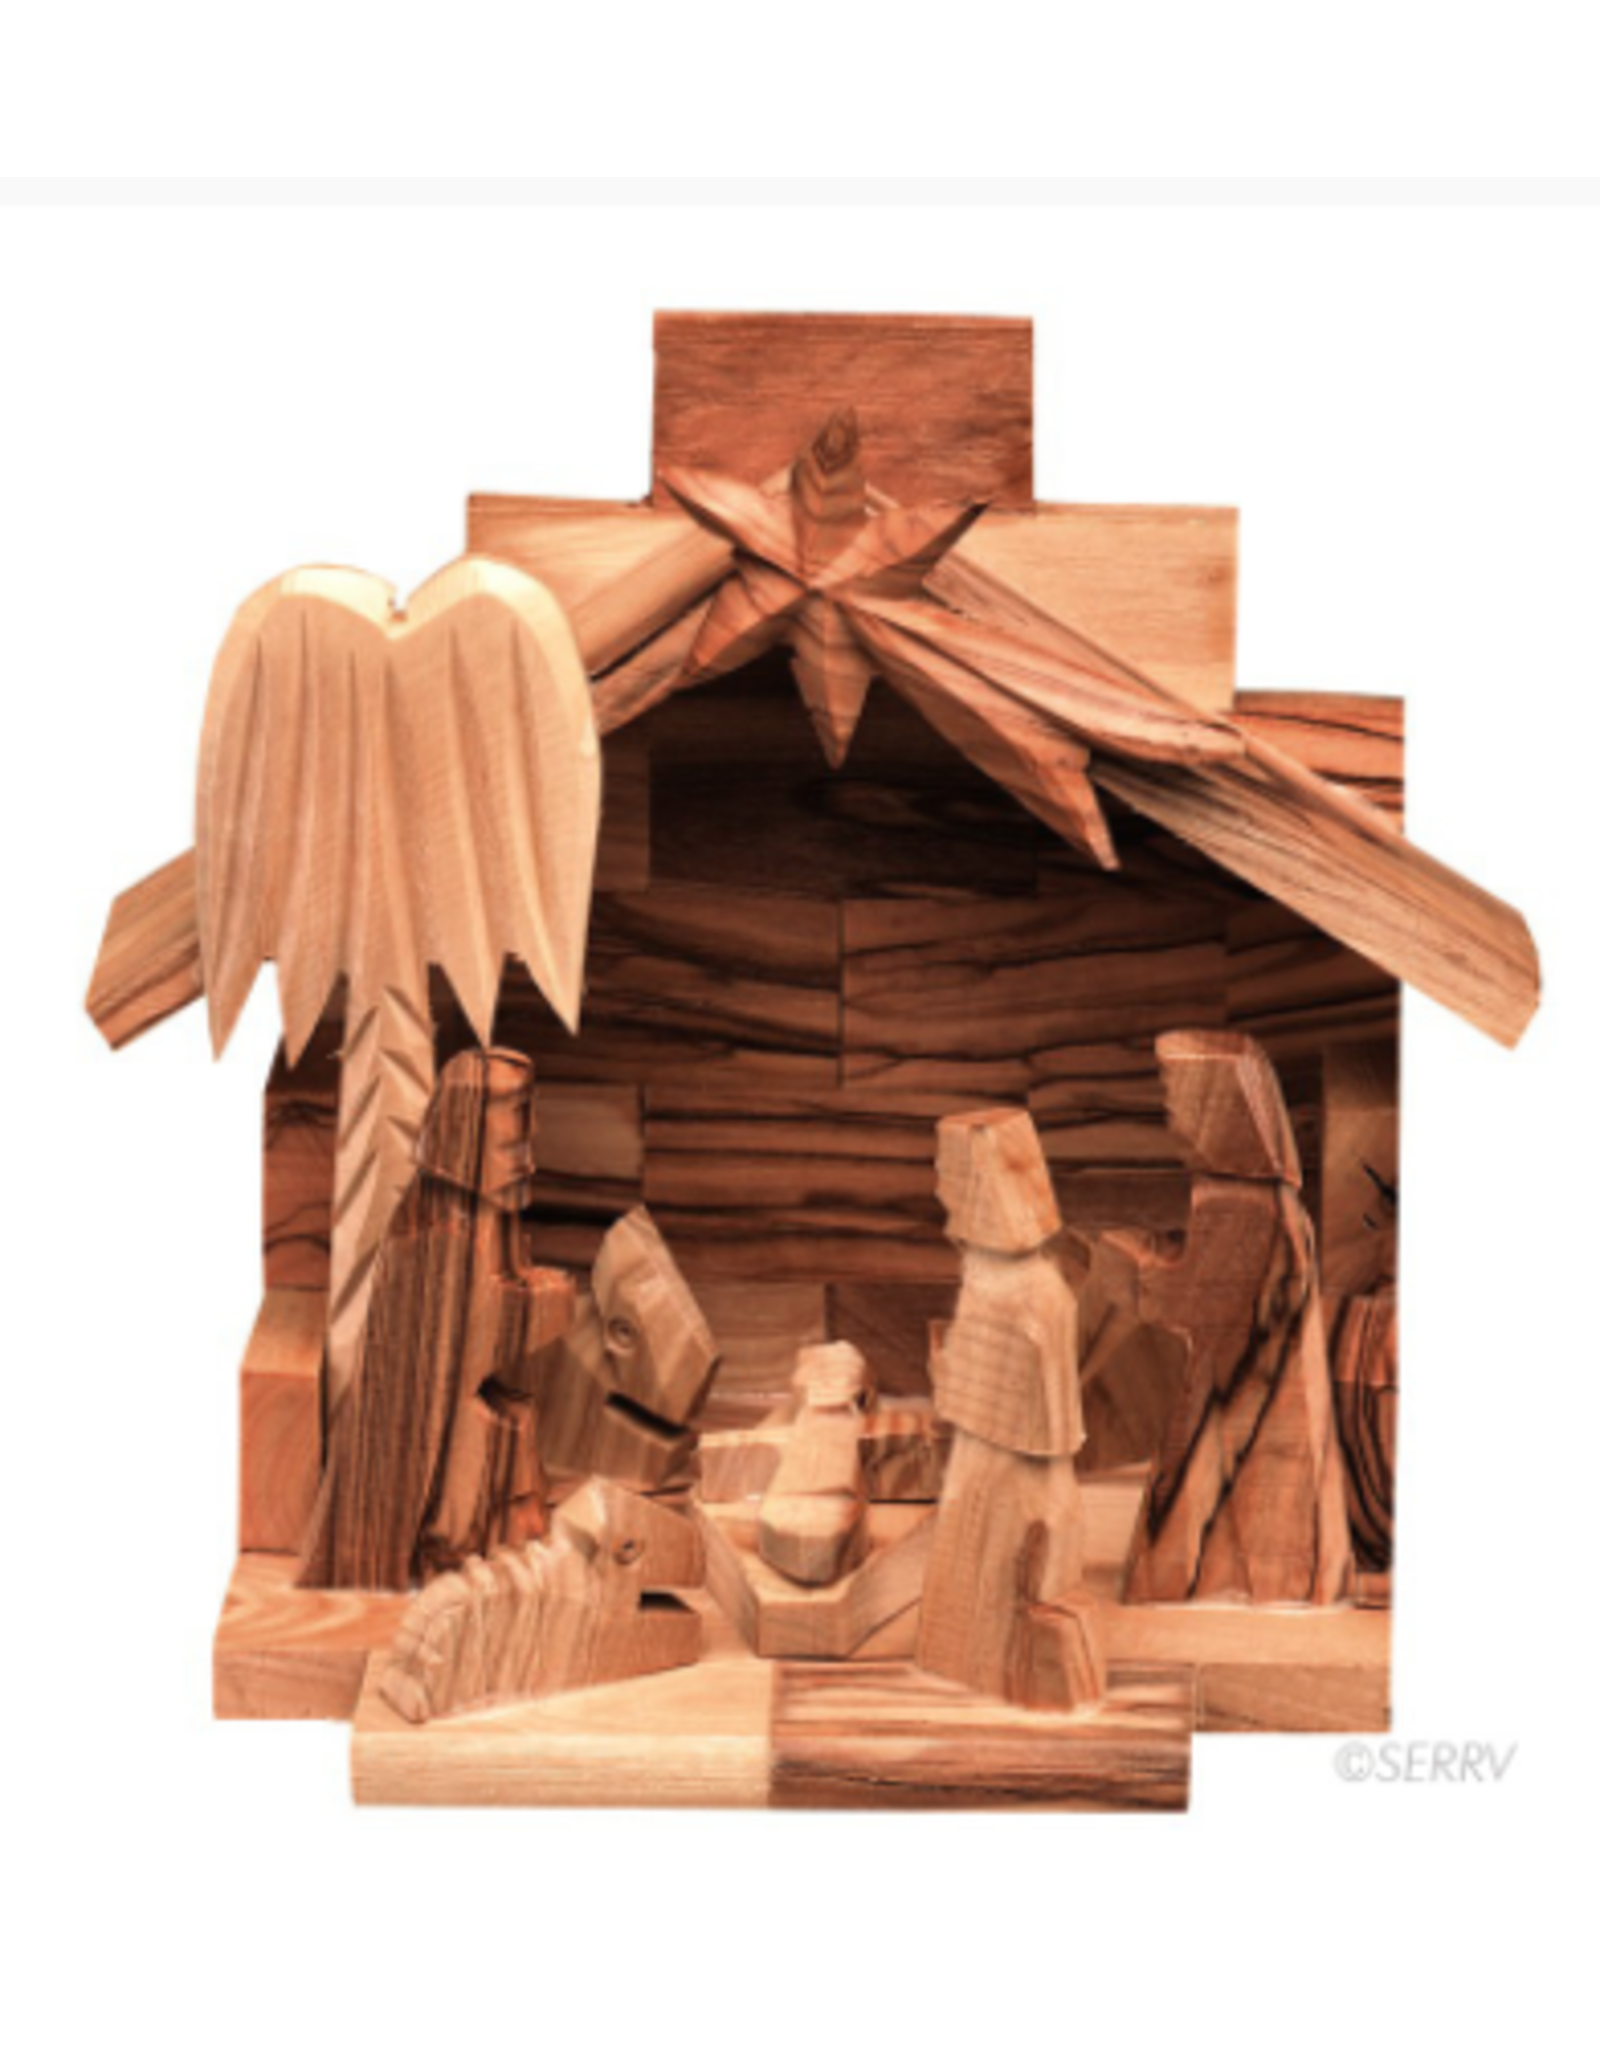 Trade roots Olive Wood Nativity